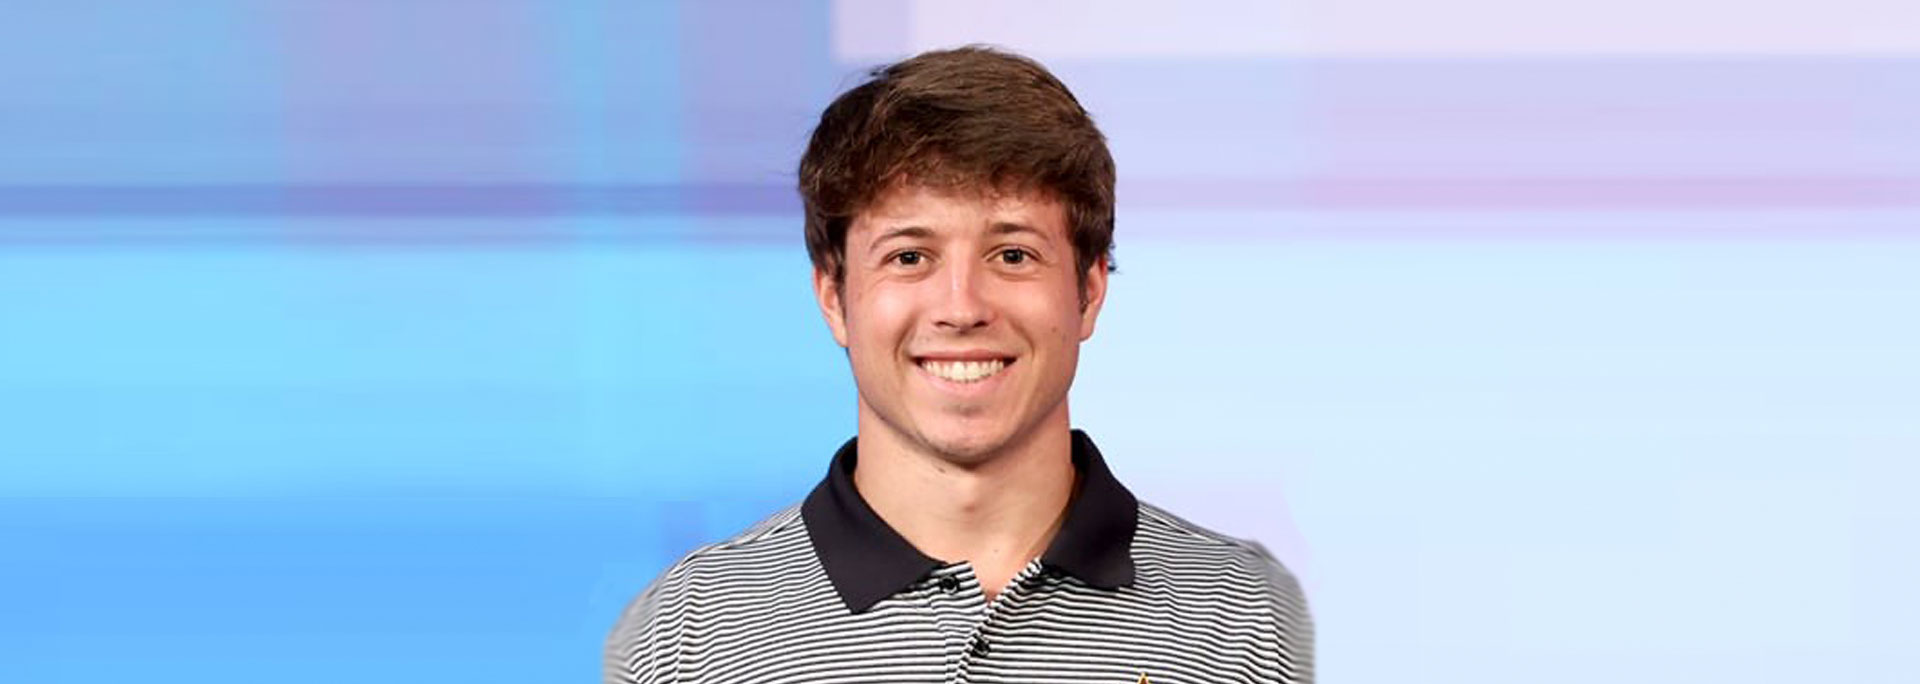 Andrew Lwowski, a December 2022 Cronkite graduate, won first place in the Hearst Sports Writing Competition.